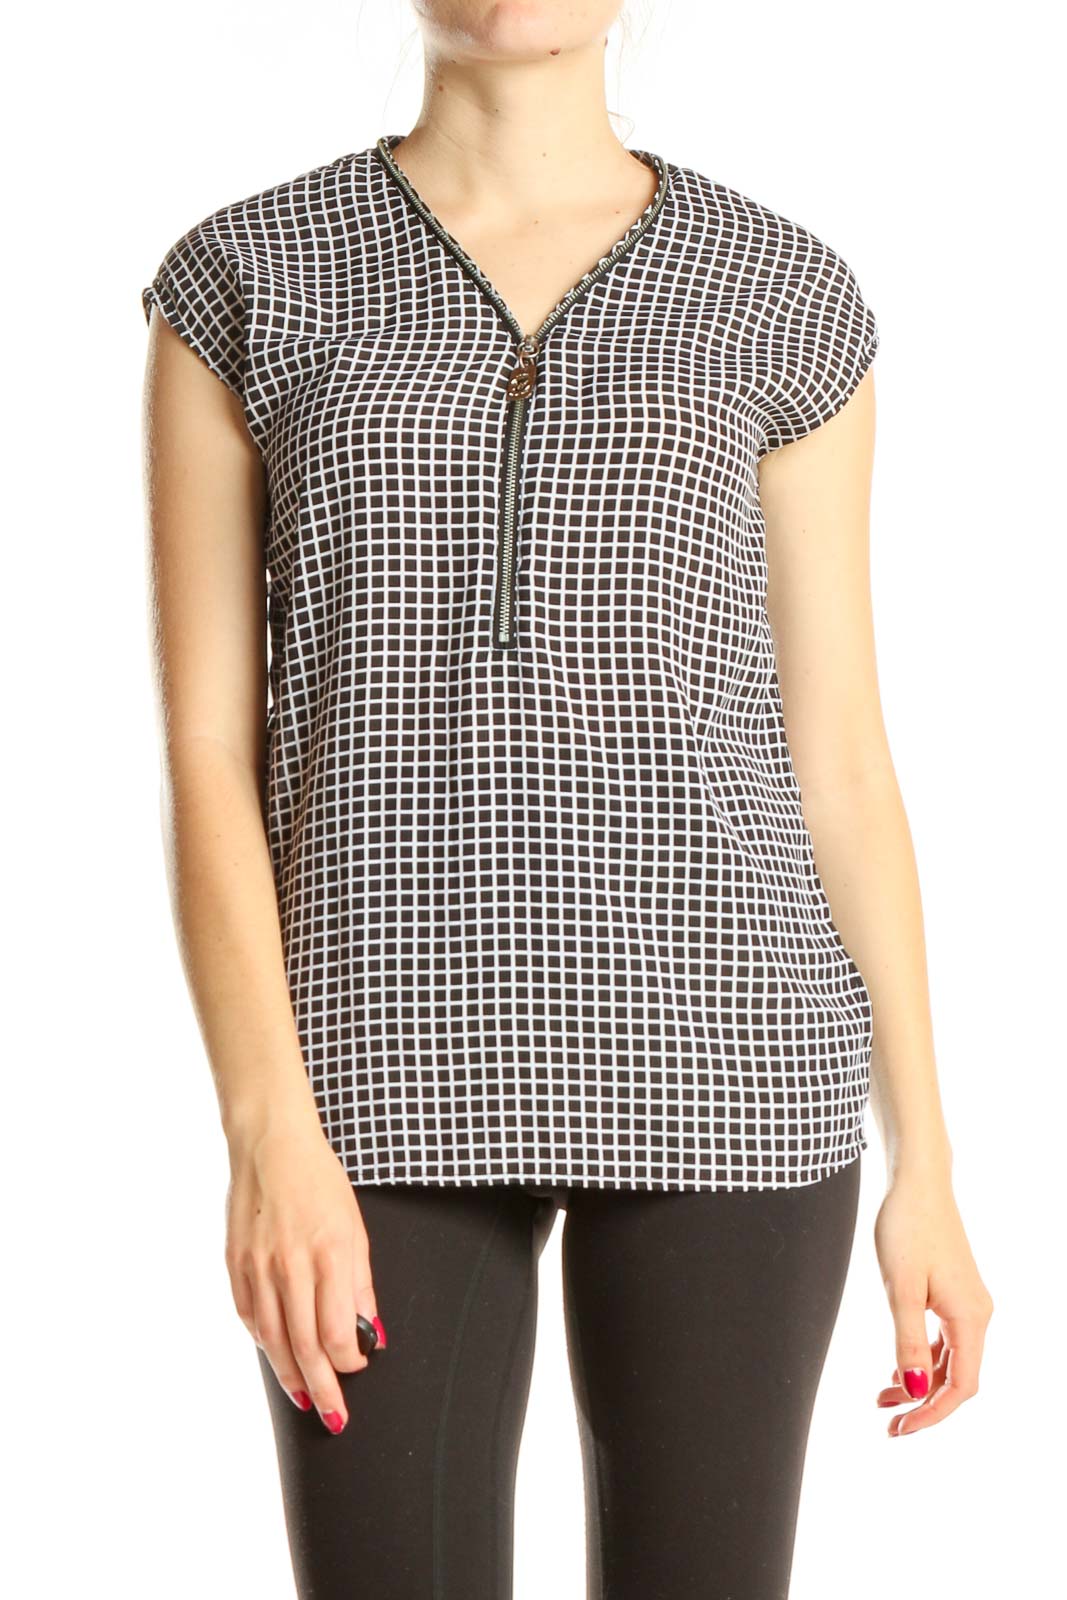 Black White Checkered Classic Blouse With Zipper Detail Front